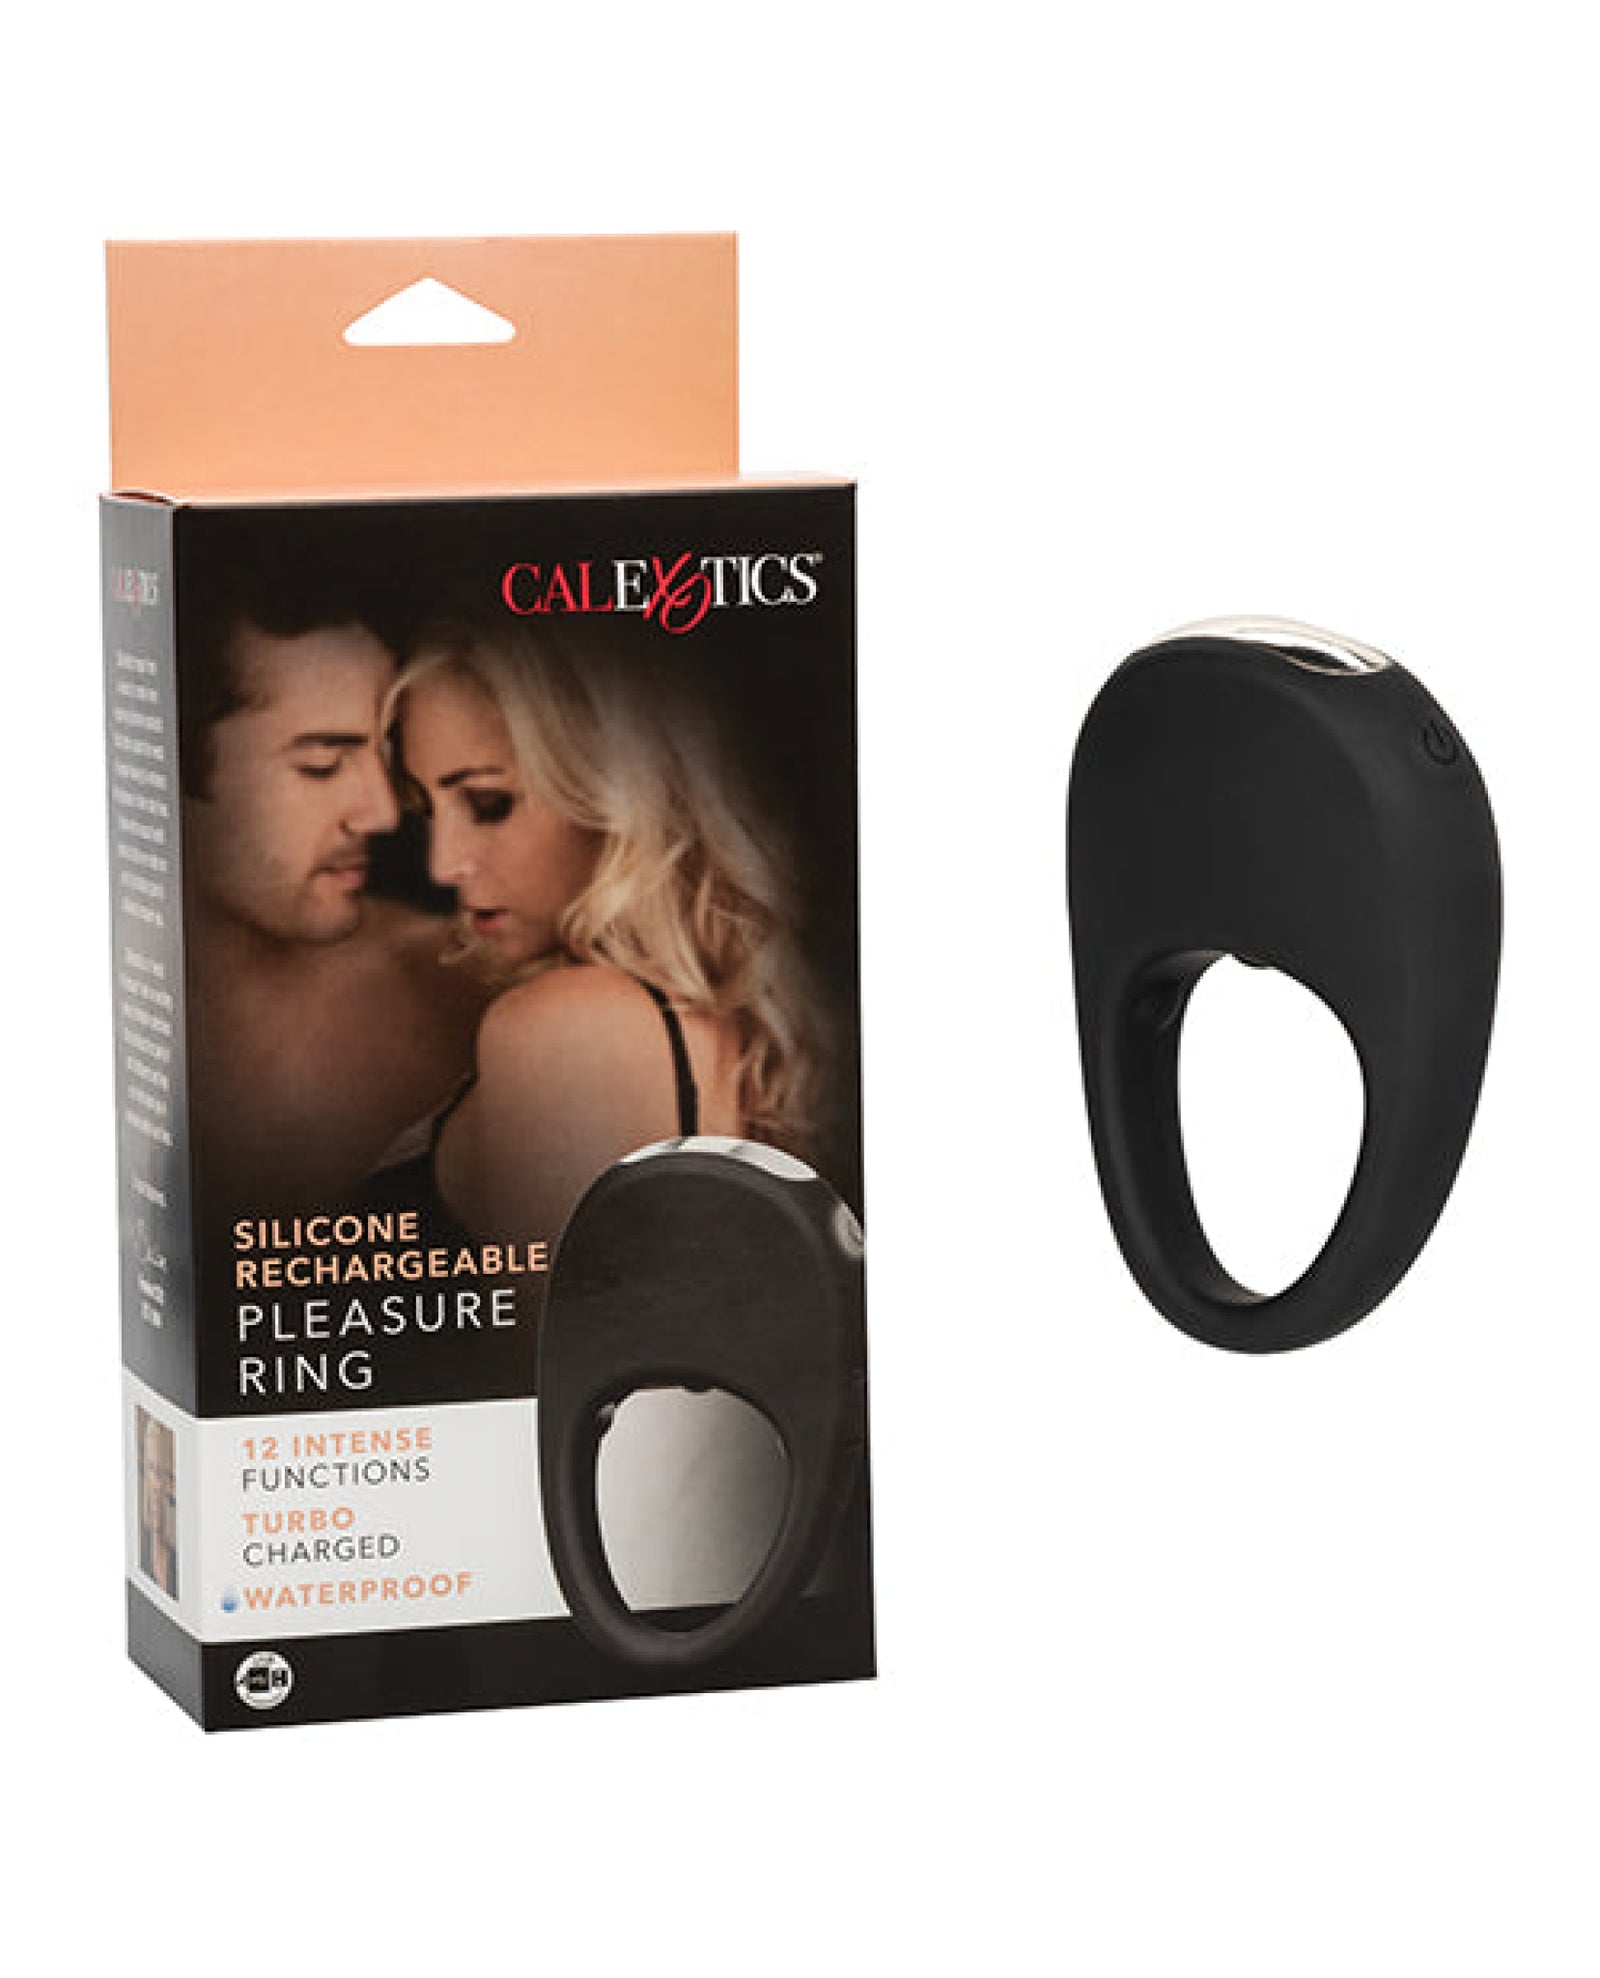 Silicone Rechargeable Pleasure Ring California Exotic Novelties